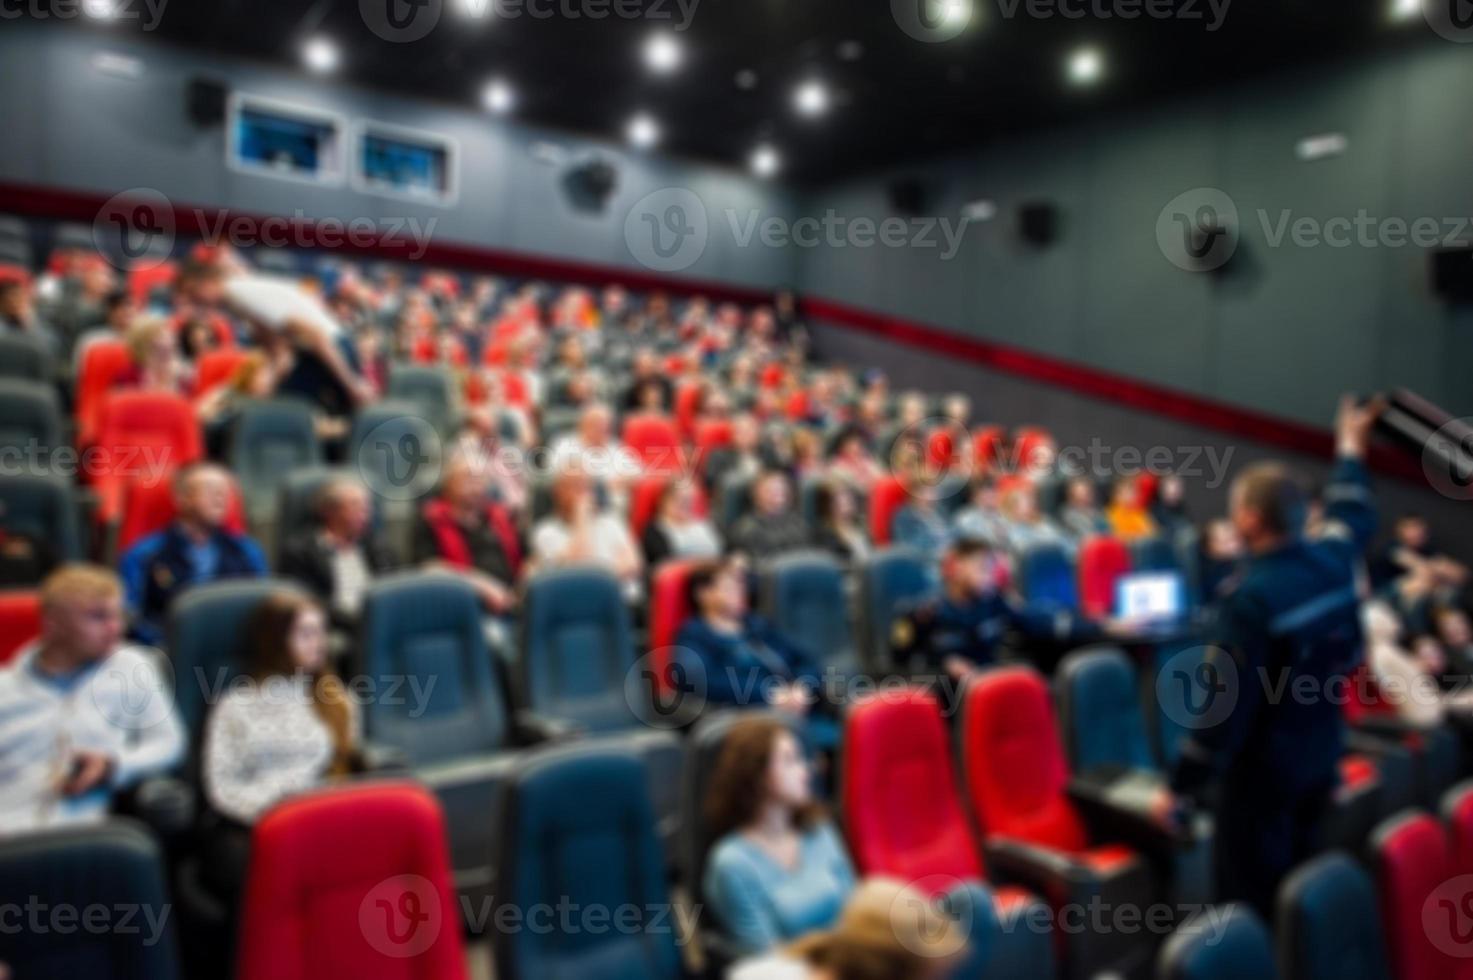 Blured photo of audience peoples in the cinema.